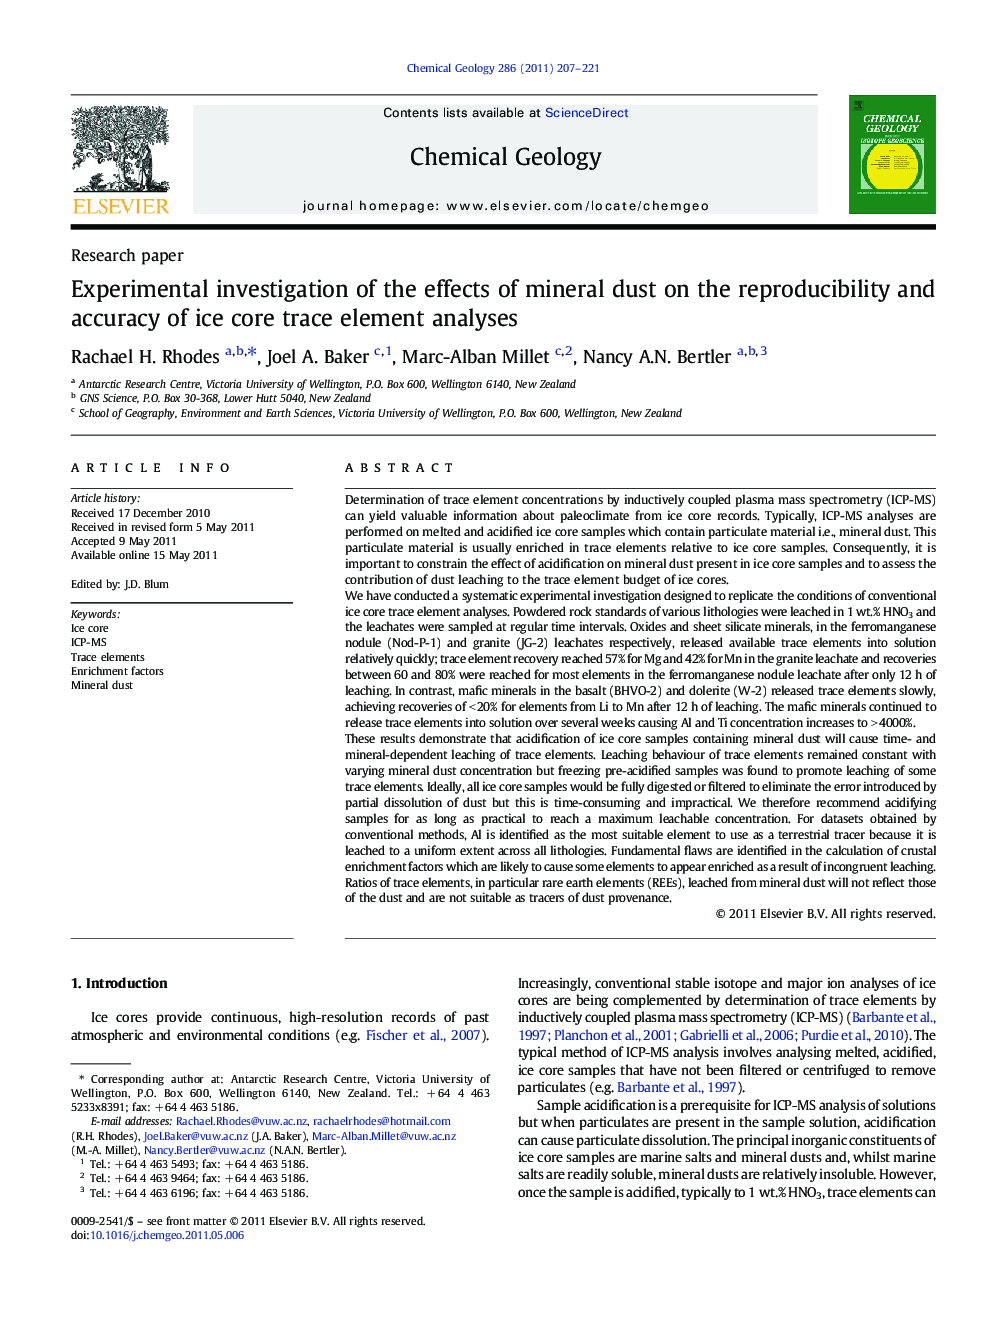 Experimental investigation of the effects of mineral dust on the reproducibility and accuracy of ice core trace element analyses